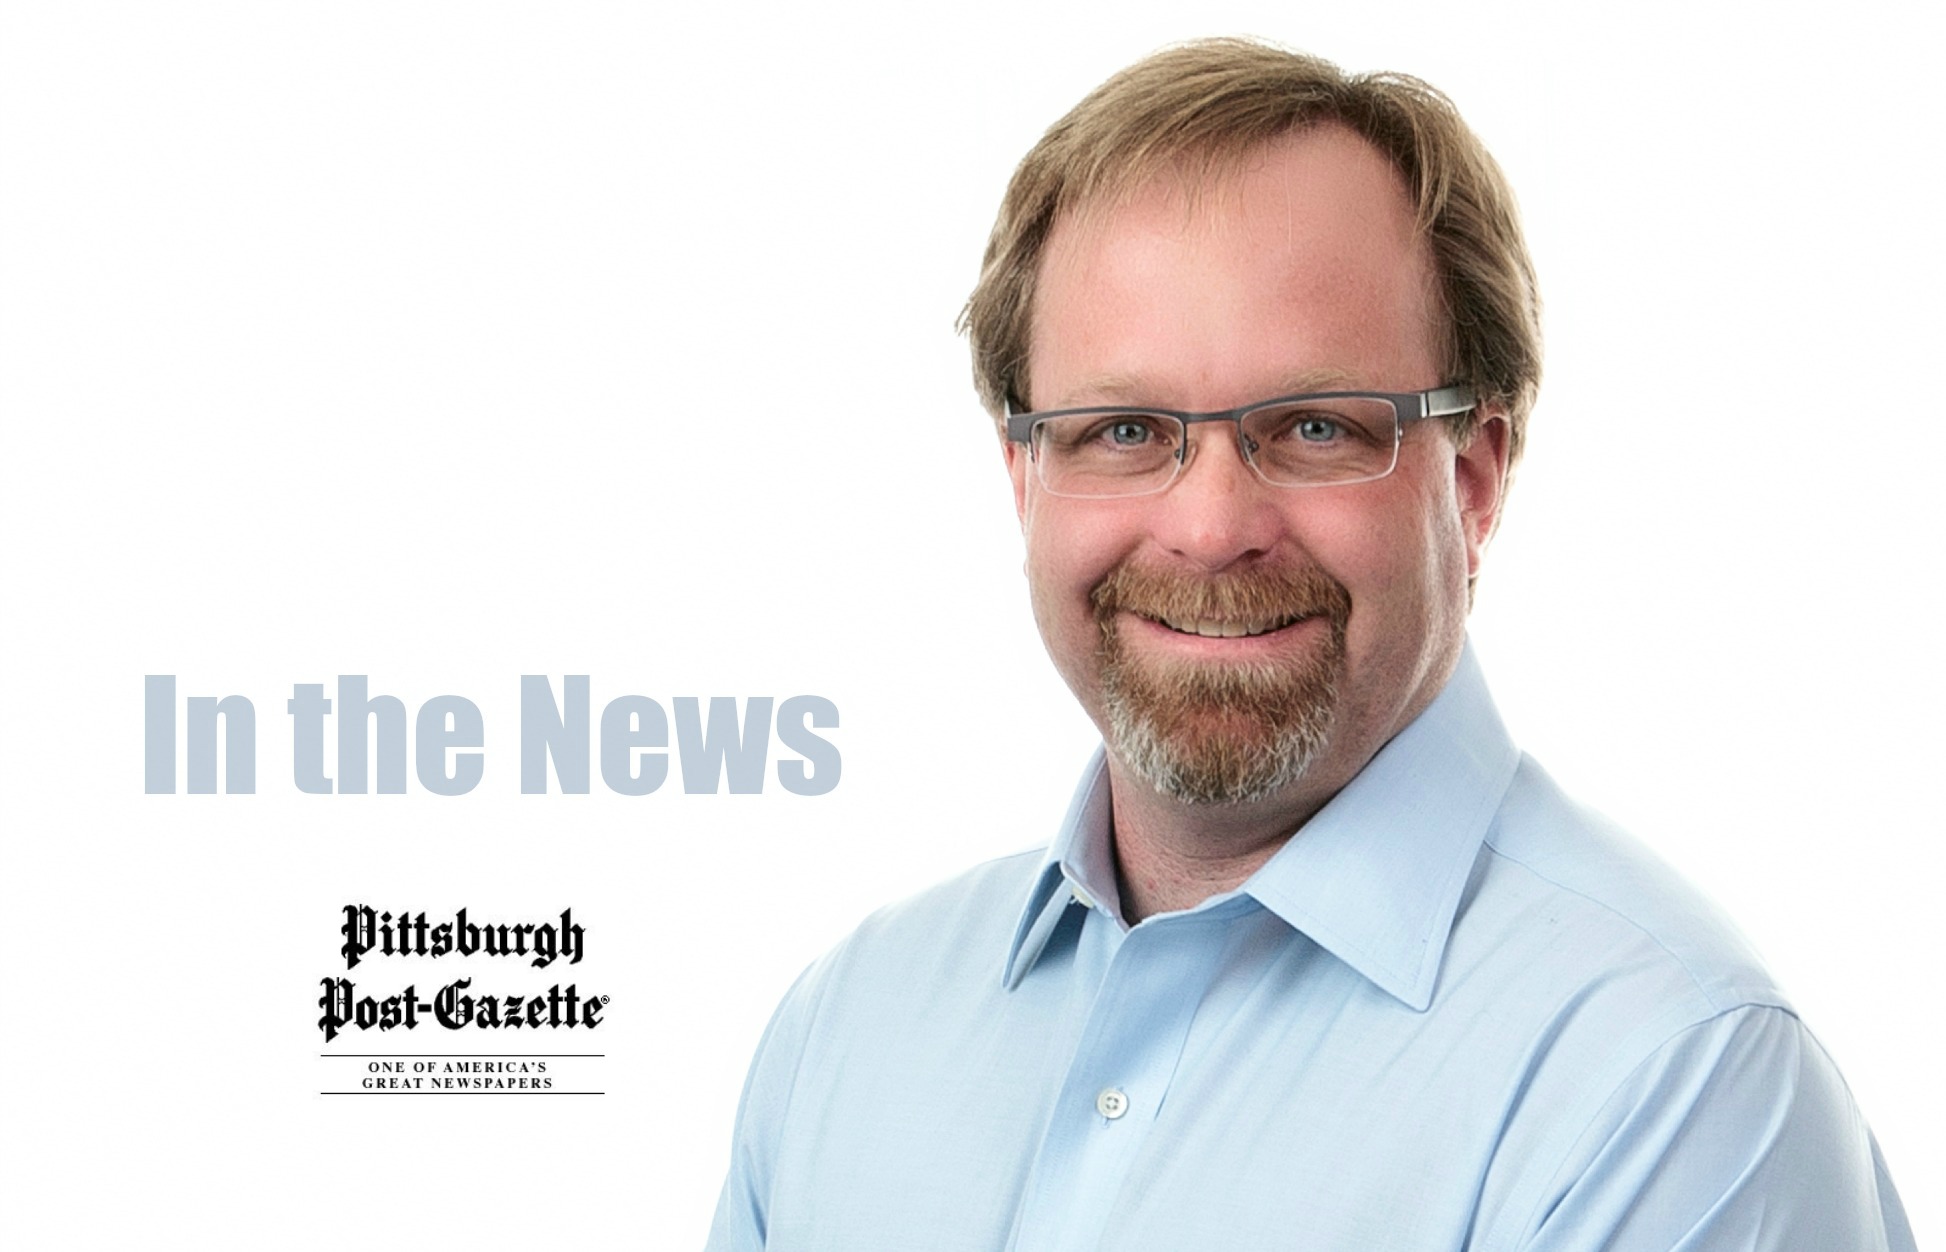 Dr. Tom Explains Gastric Revision Surgery in the Pittsburgh Post Gazette